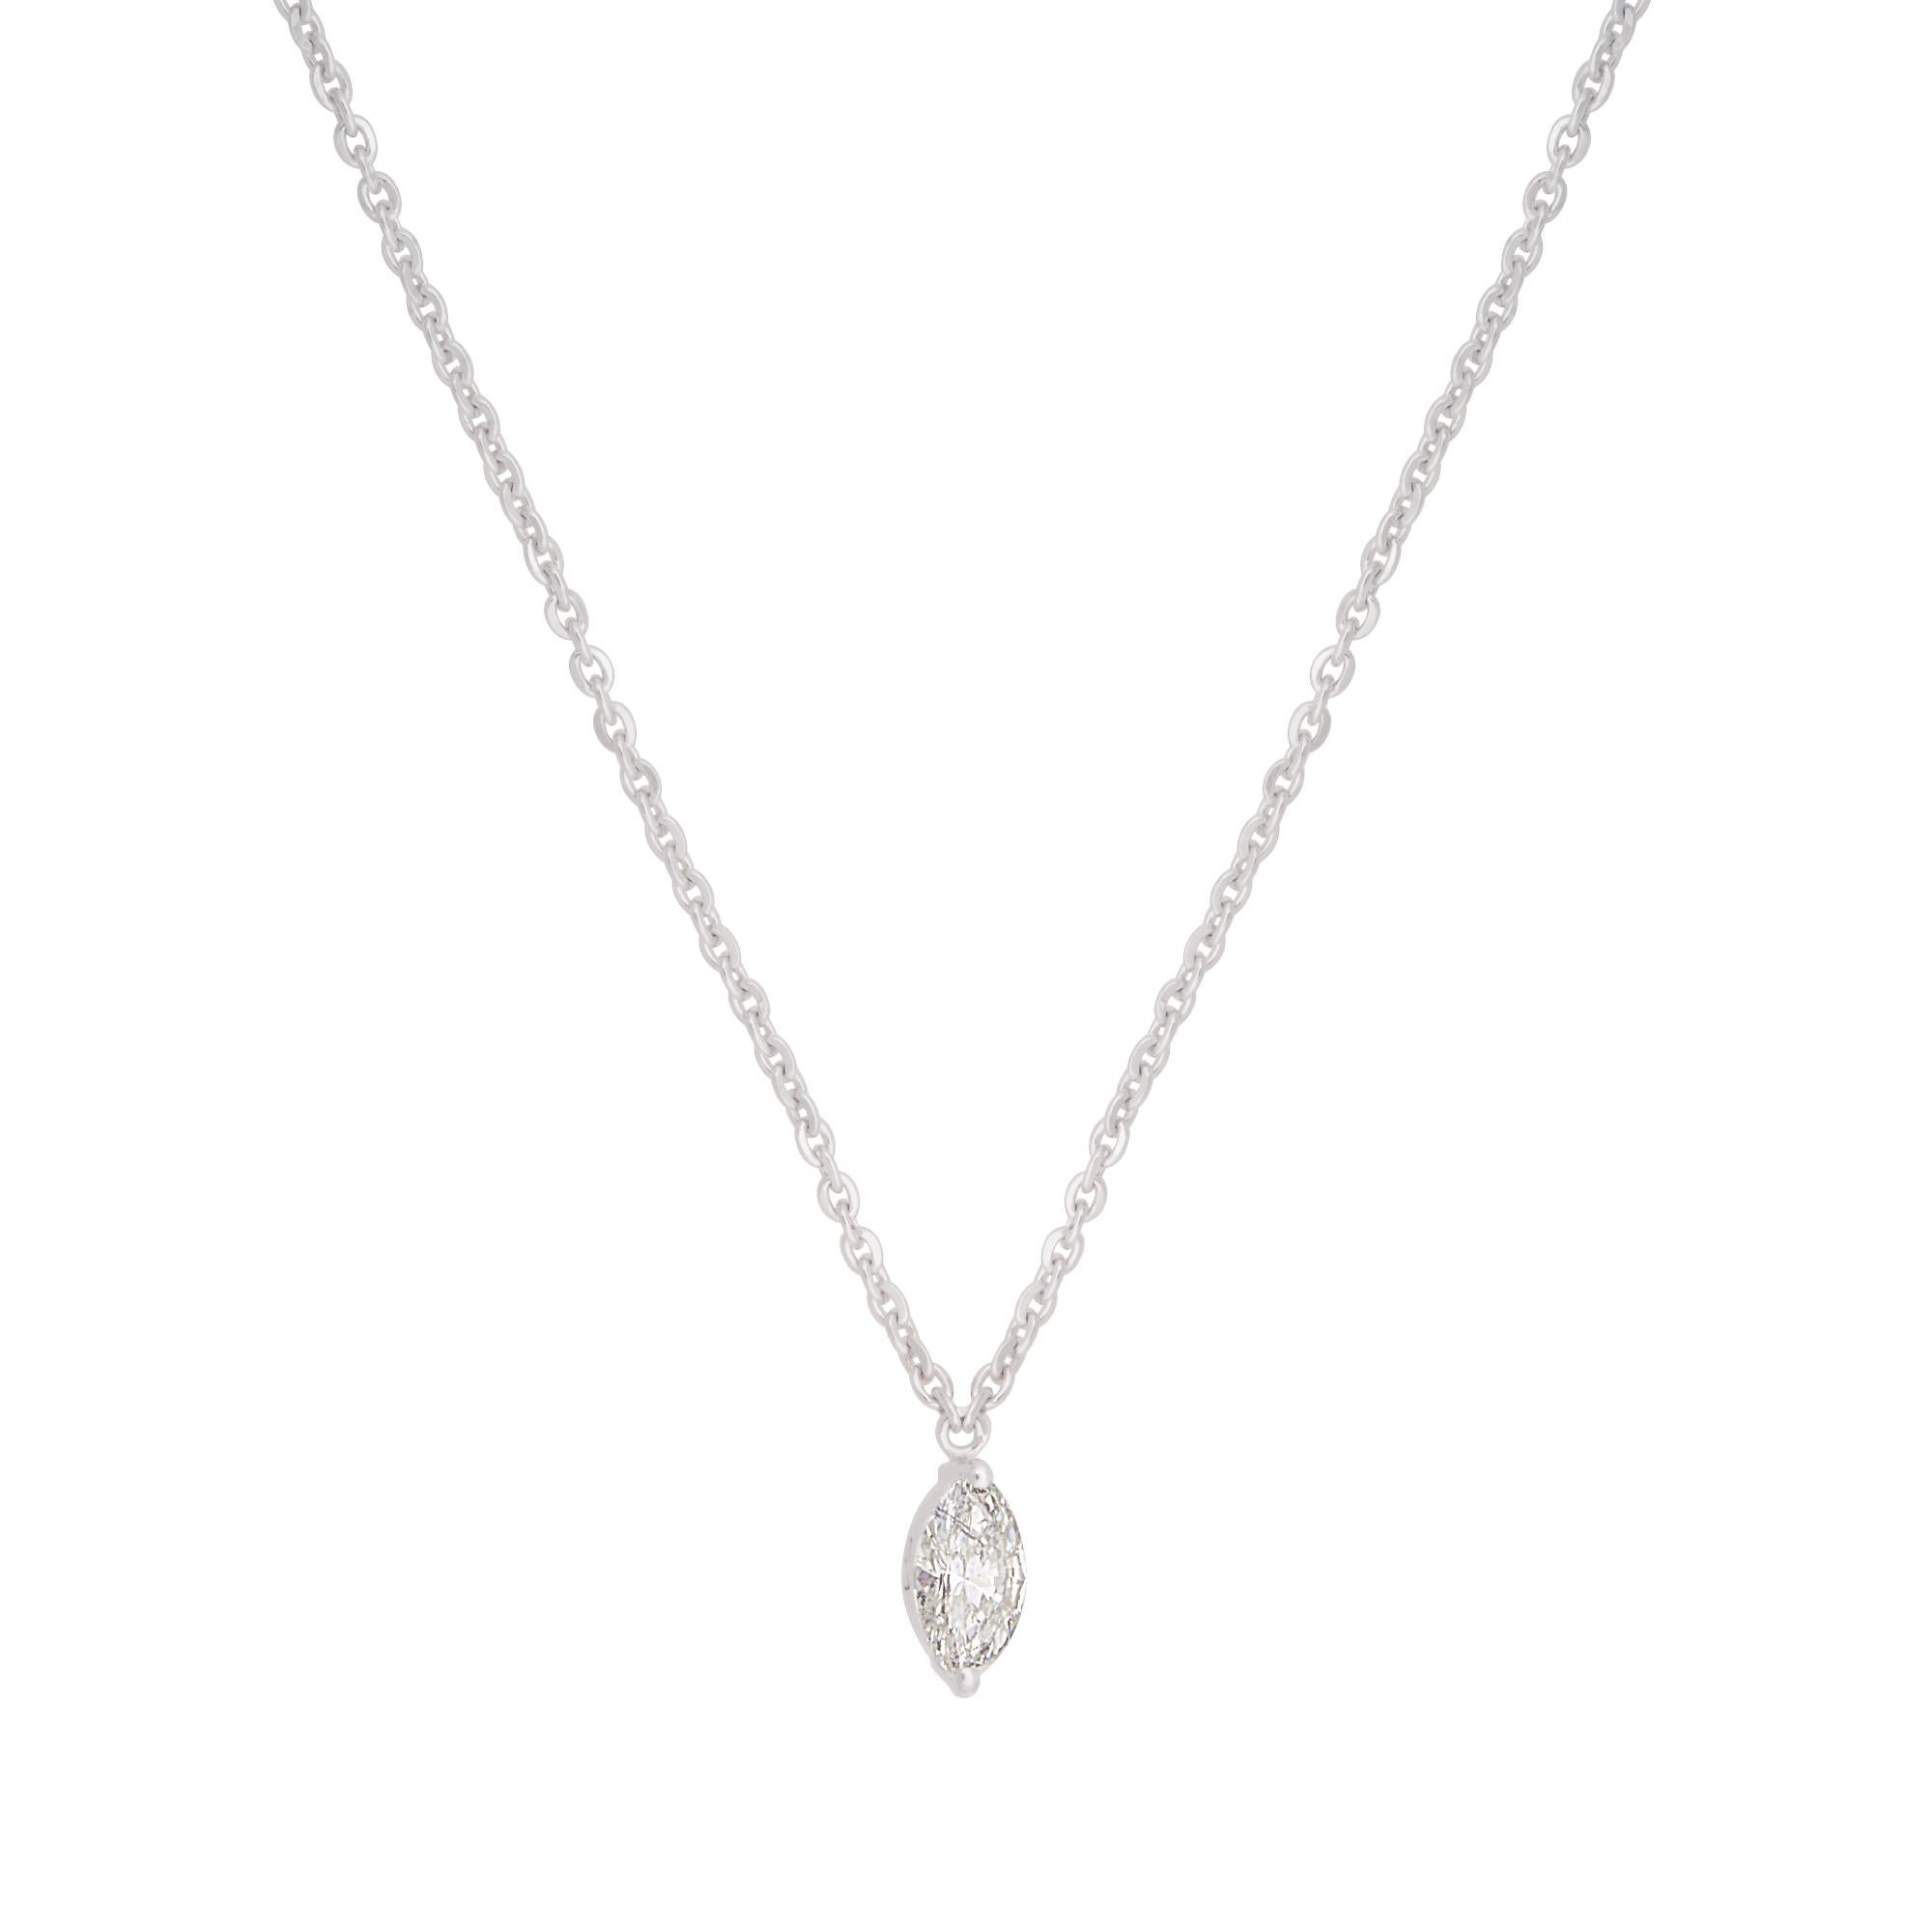 The centerpiece of this necklace is a stunning solitaire marquise-cut diamond, weighing 0.35 carats. The marquise cut, with its elongated shape and pointed ends, creates a sense of sophistication and uniqueness. The diamond's exceptional brilliance